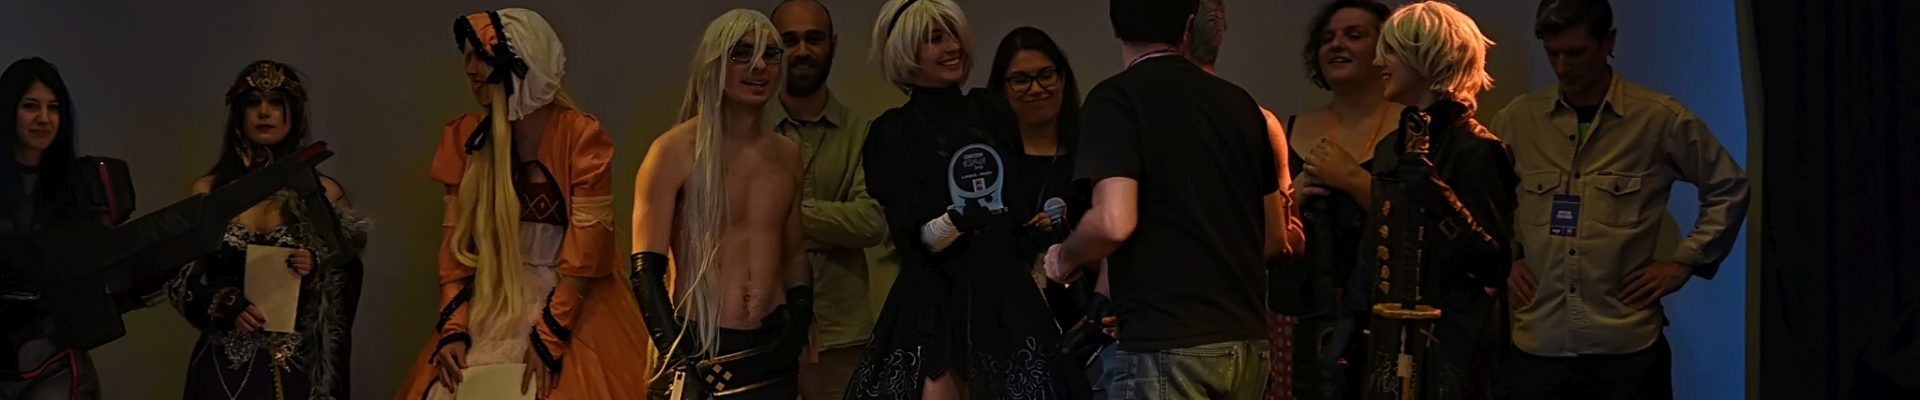 Comicdom Cosplay 2019 - Judges And Prizes